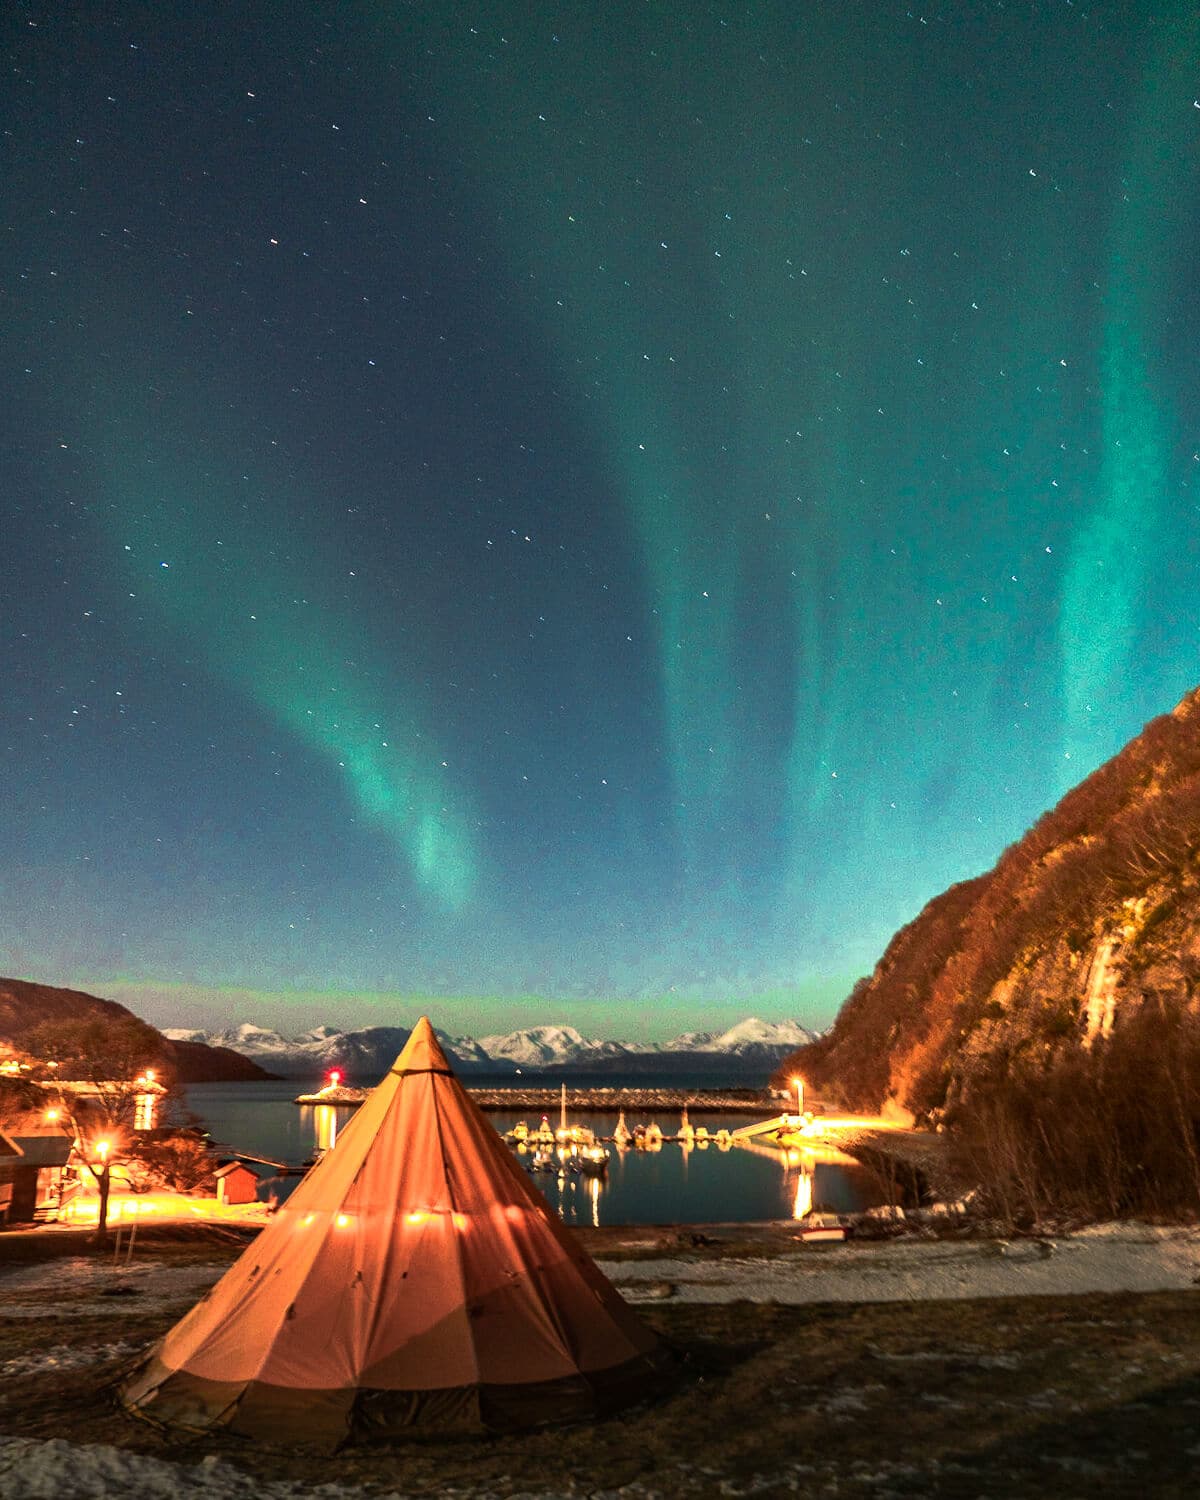 spørgeskema glans Skubbe The Absolute Best Time to See the Northern Lights in Norway + Helpful Tips  - Live Like It's the Weekend